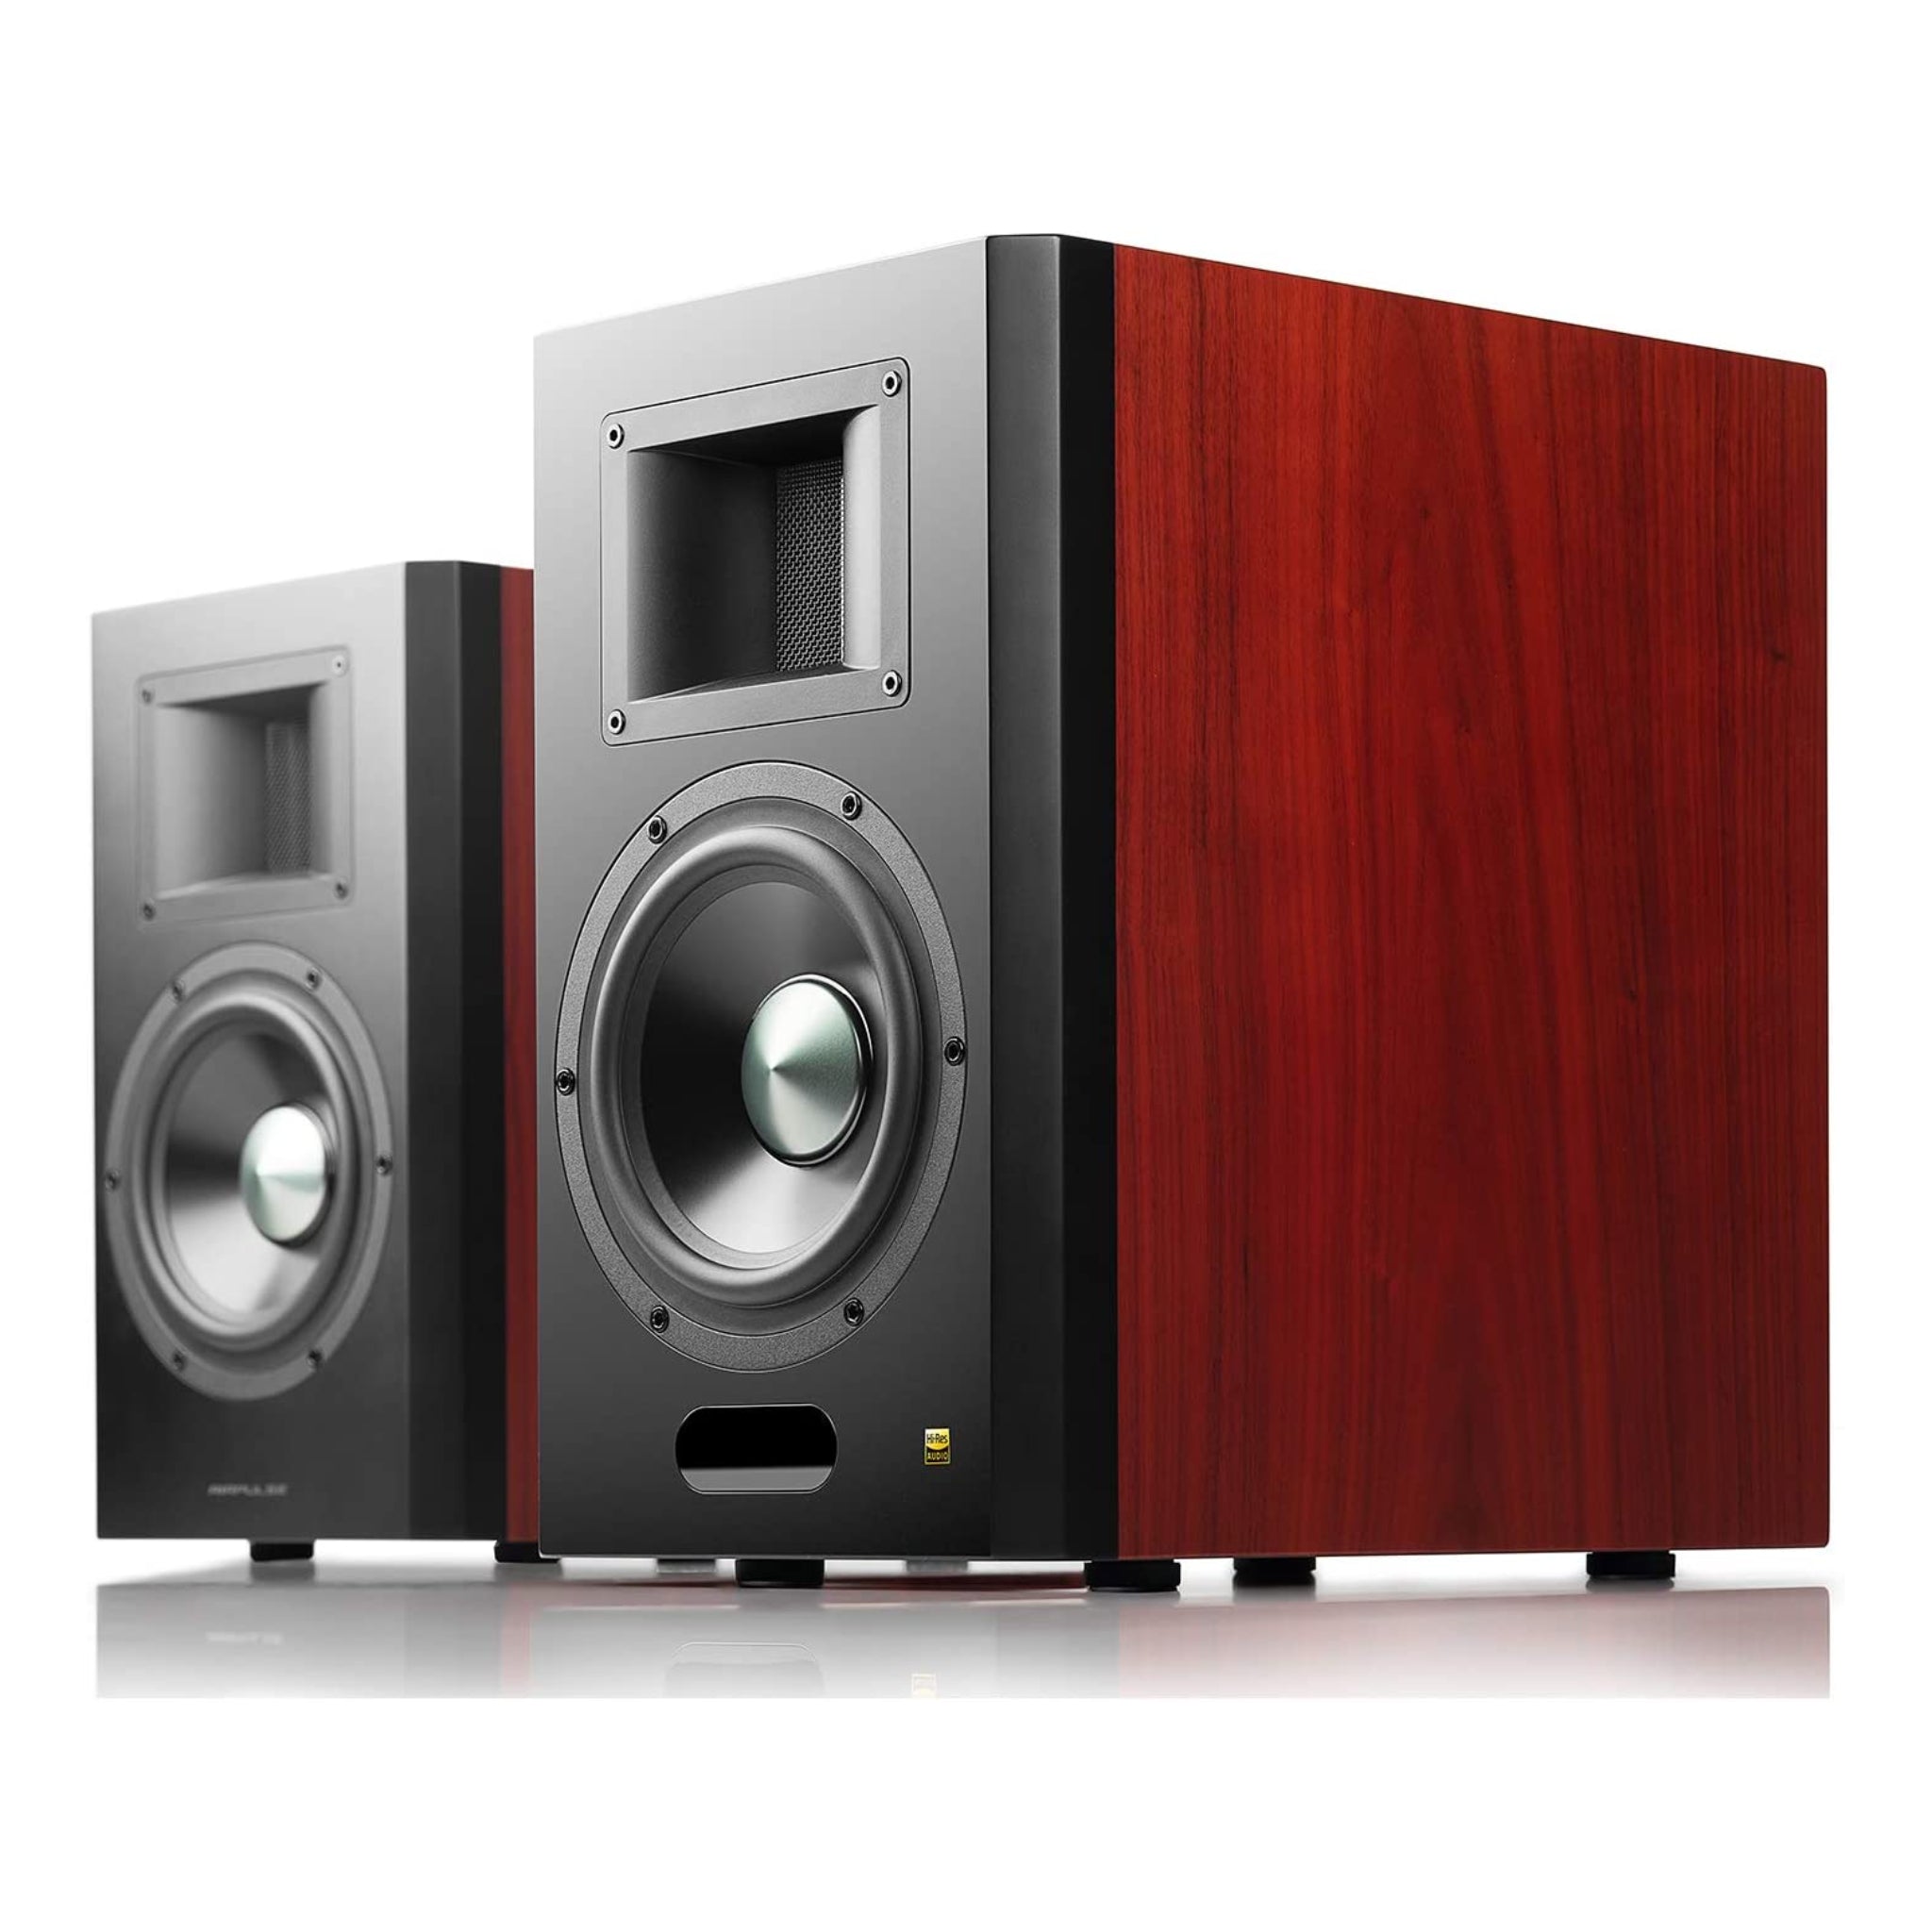 Airpulse A300PRO Dual Active HiFi Speakers with Hi-Res Audio